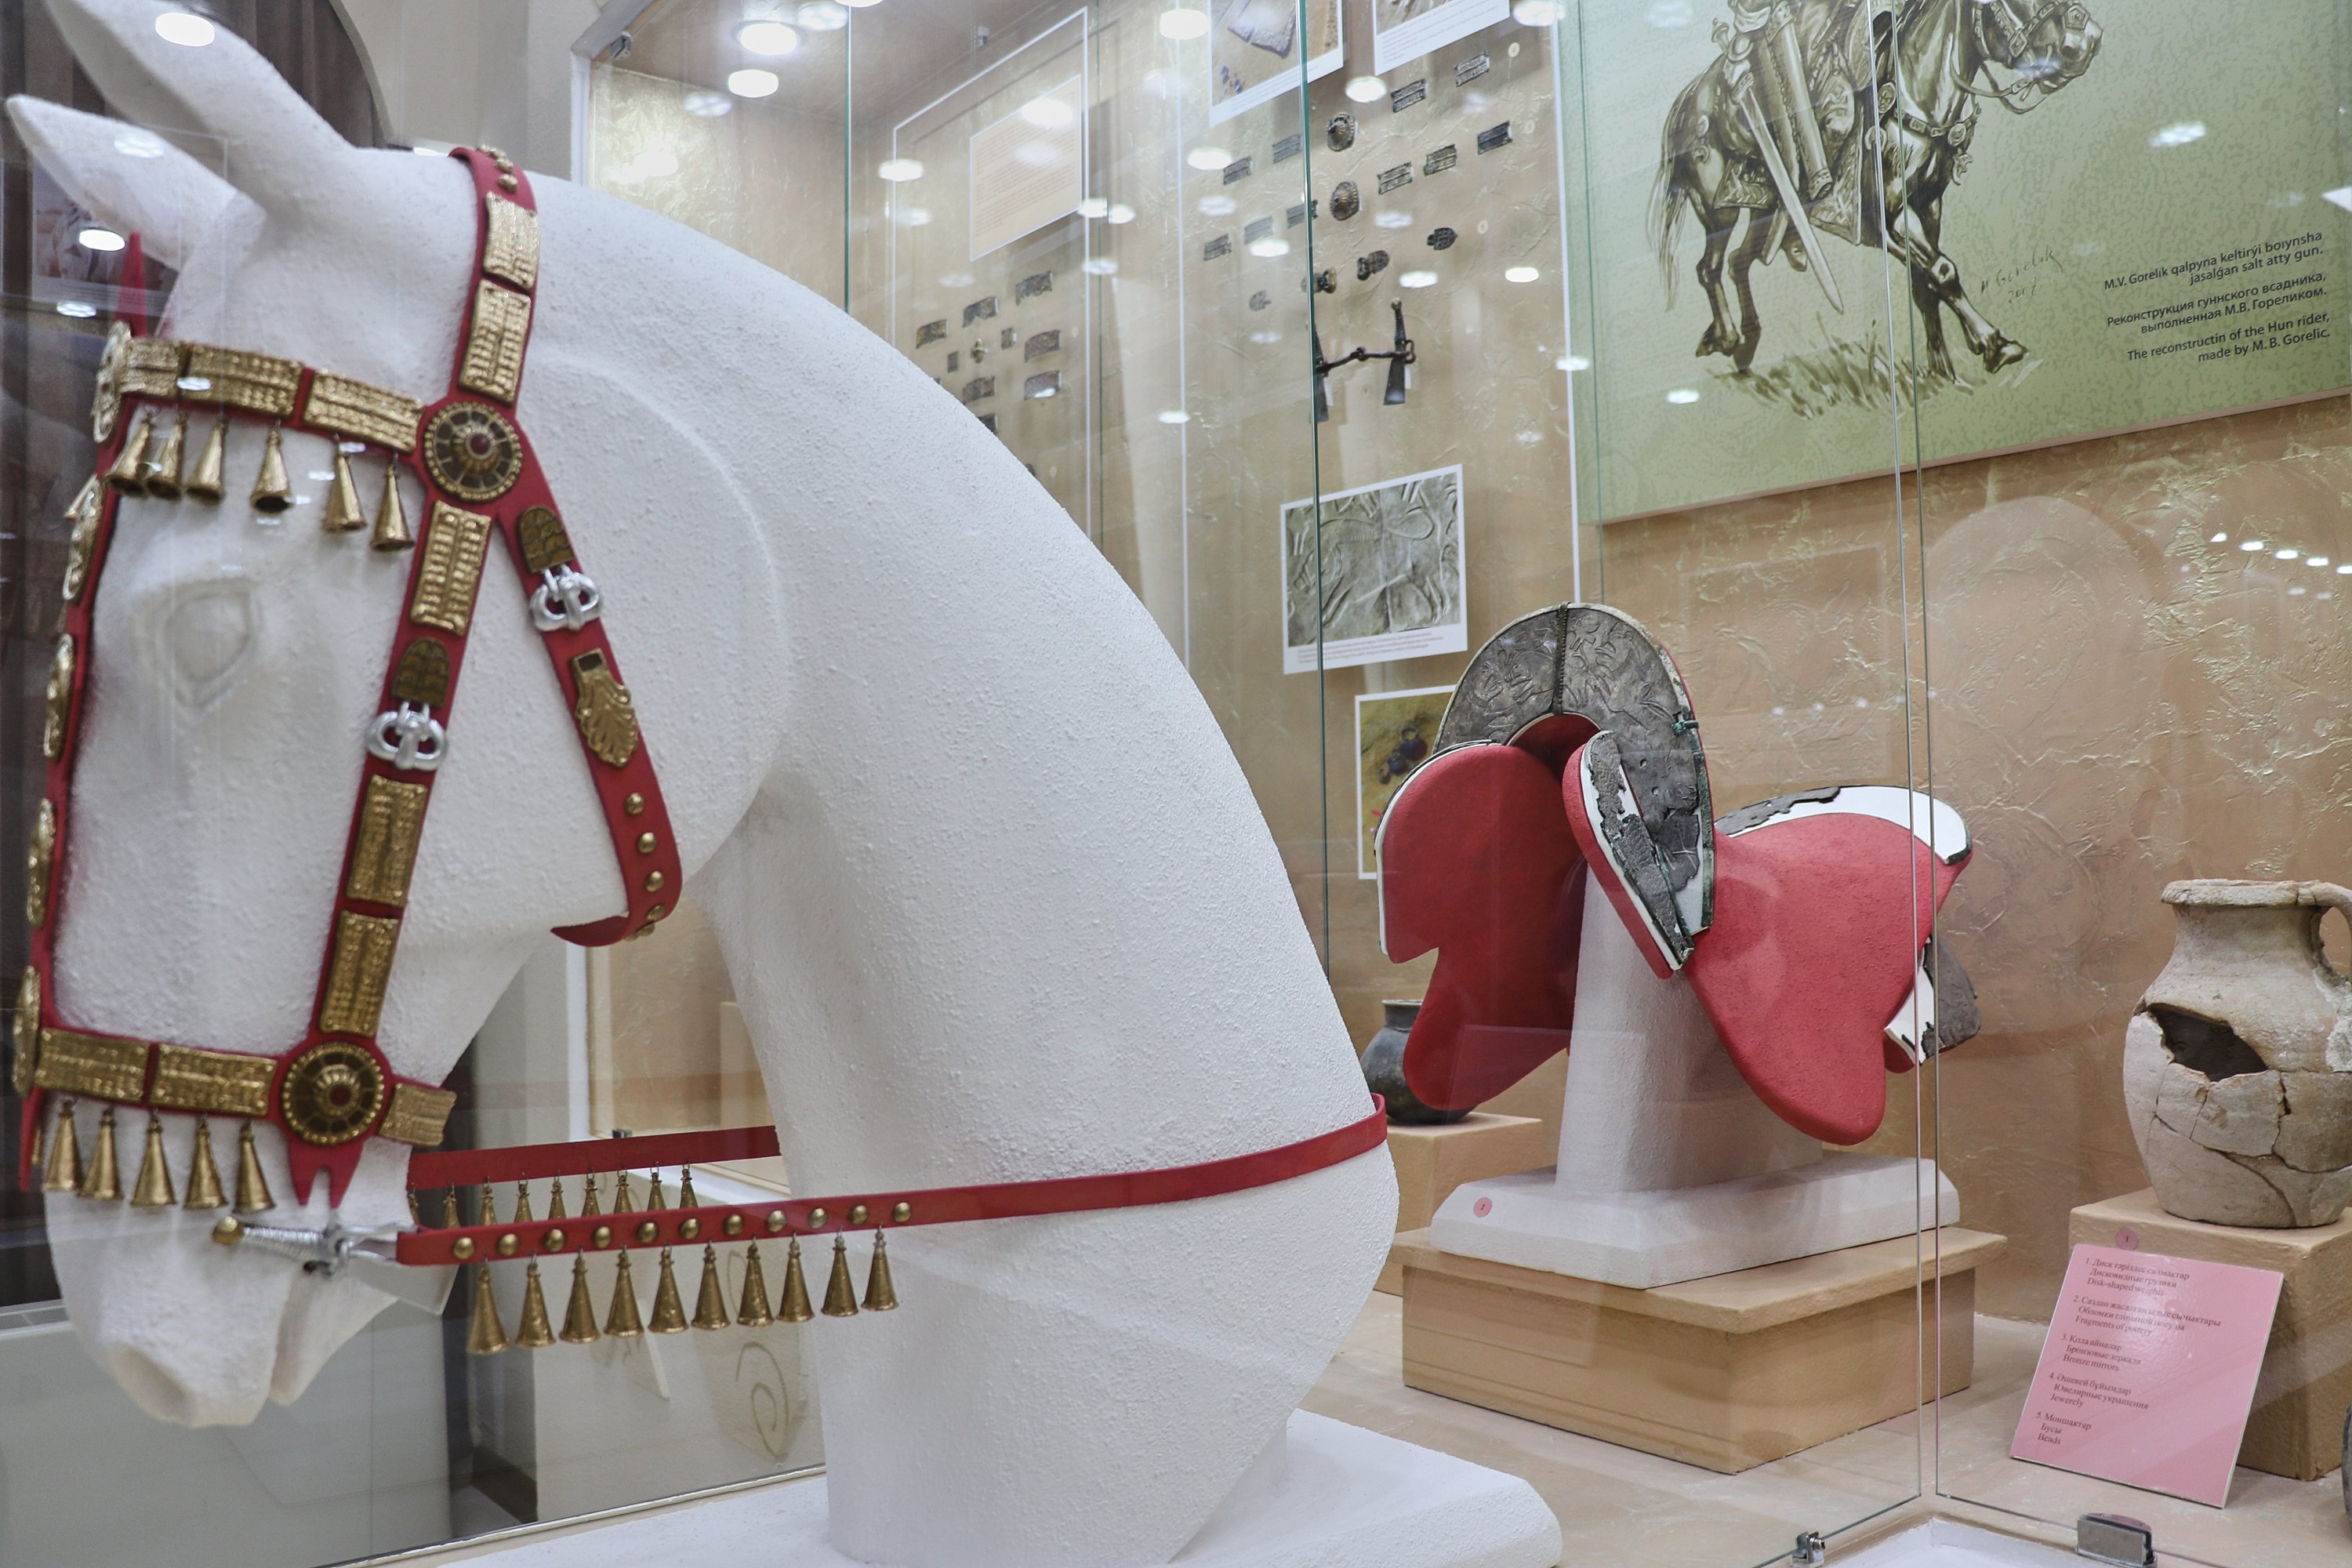 2,000 year-old bridle and saddle made of pure gold and silver belonging to a Hun soldier are exhibited in the Abiş Kekilbayev Regional Promotion Museum in Aktau, Kazakhstan, July 11, 2022. (AA Photo)